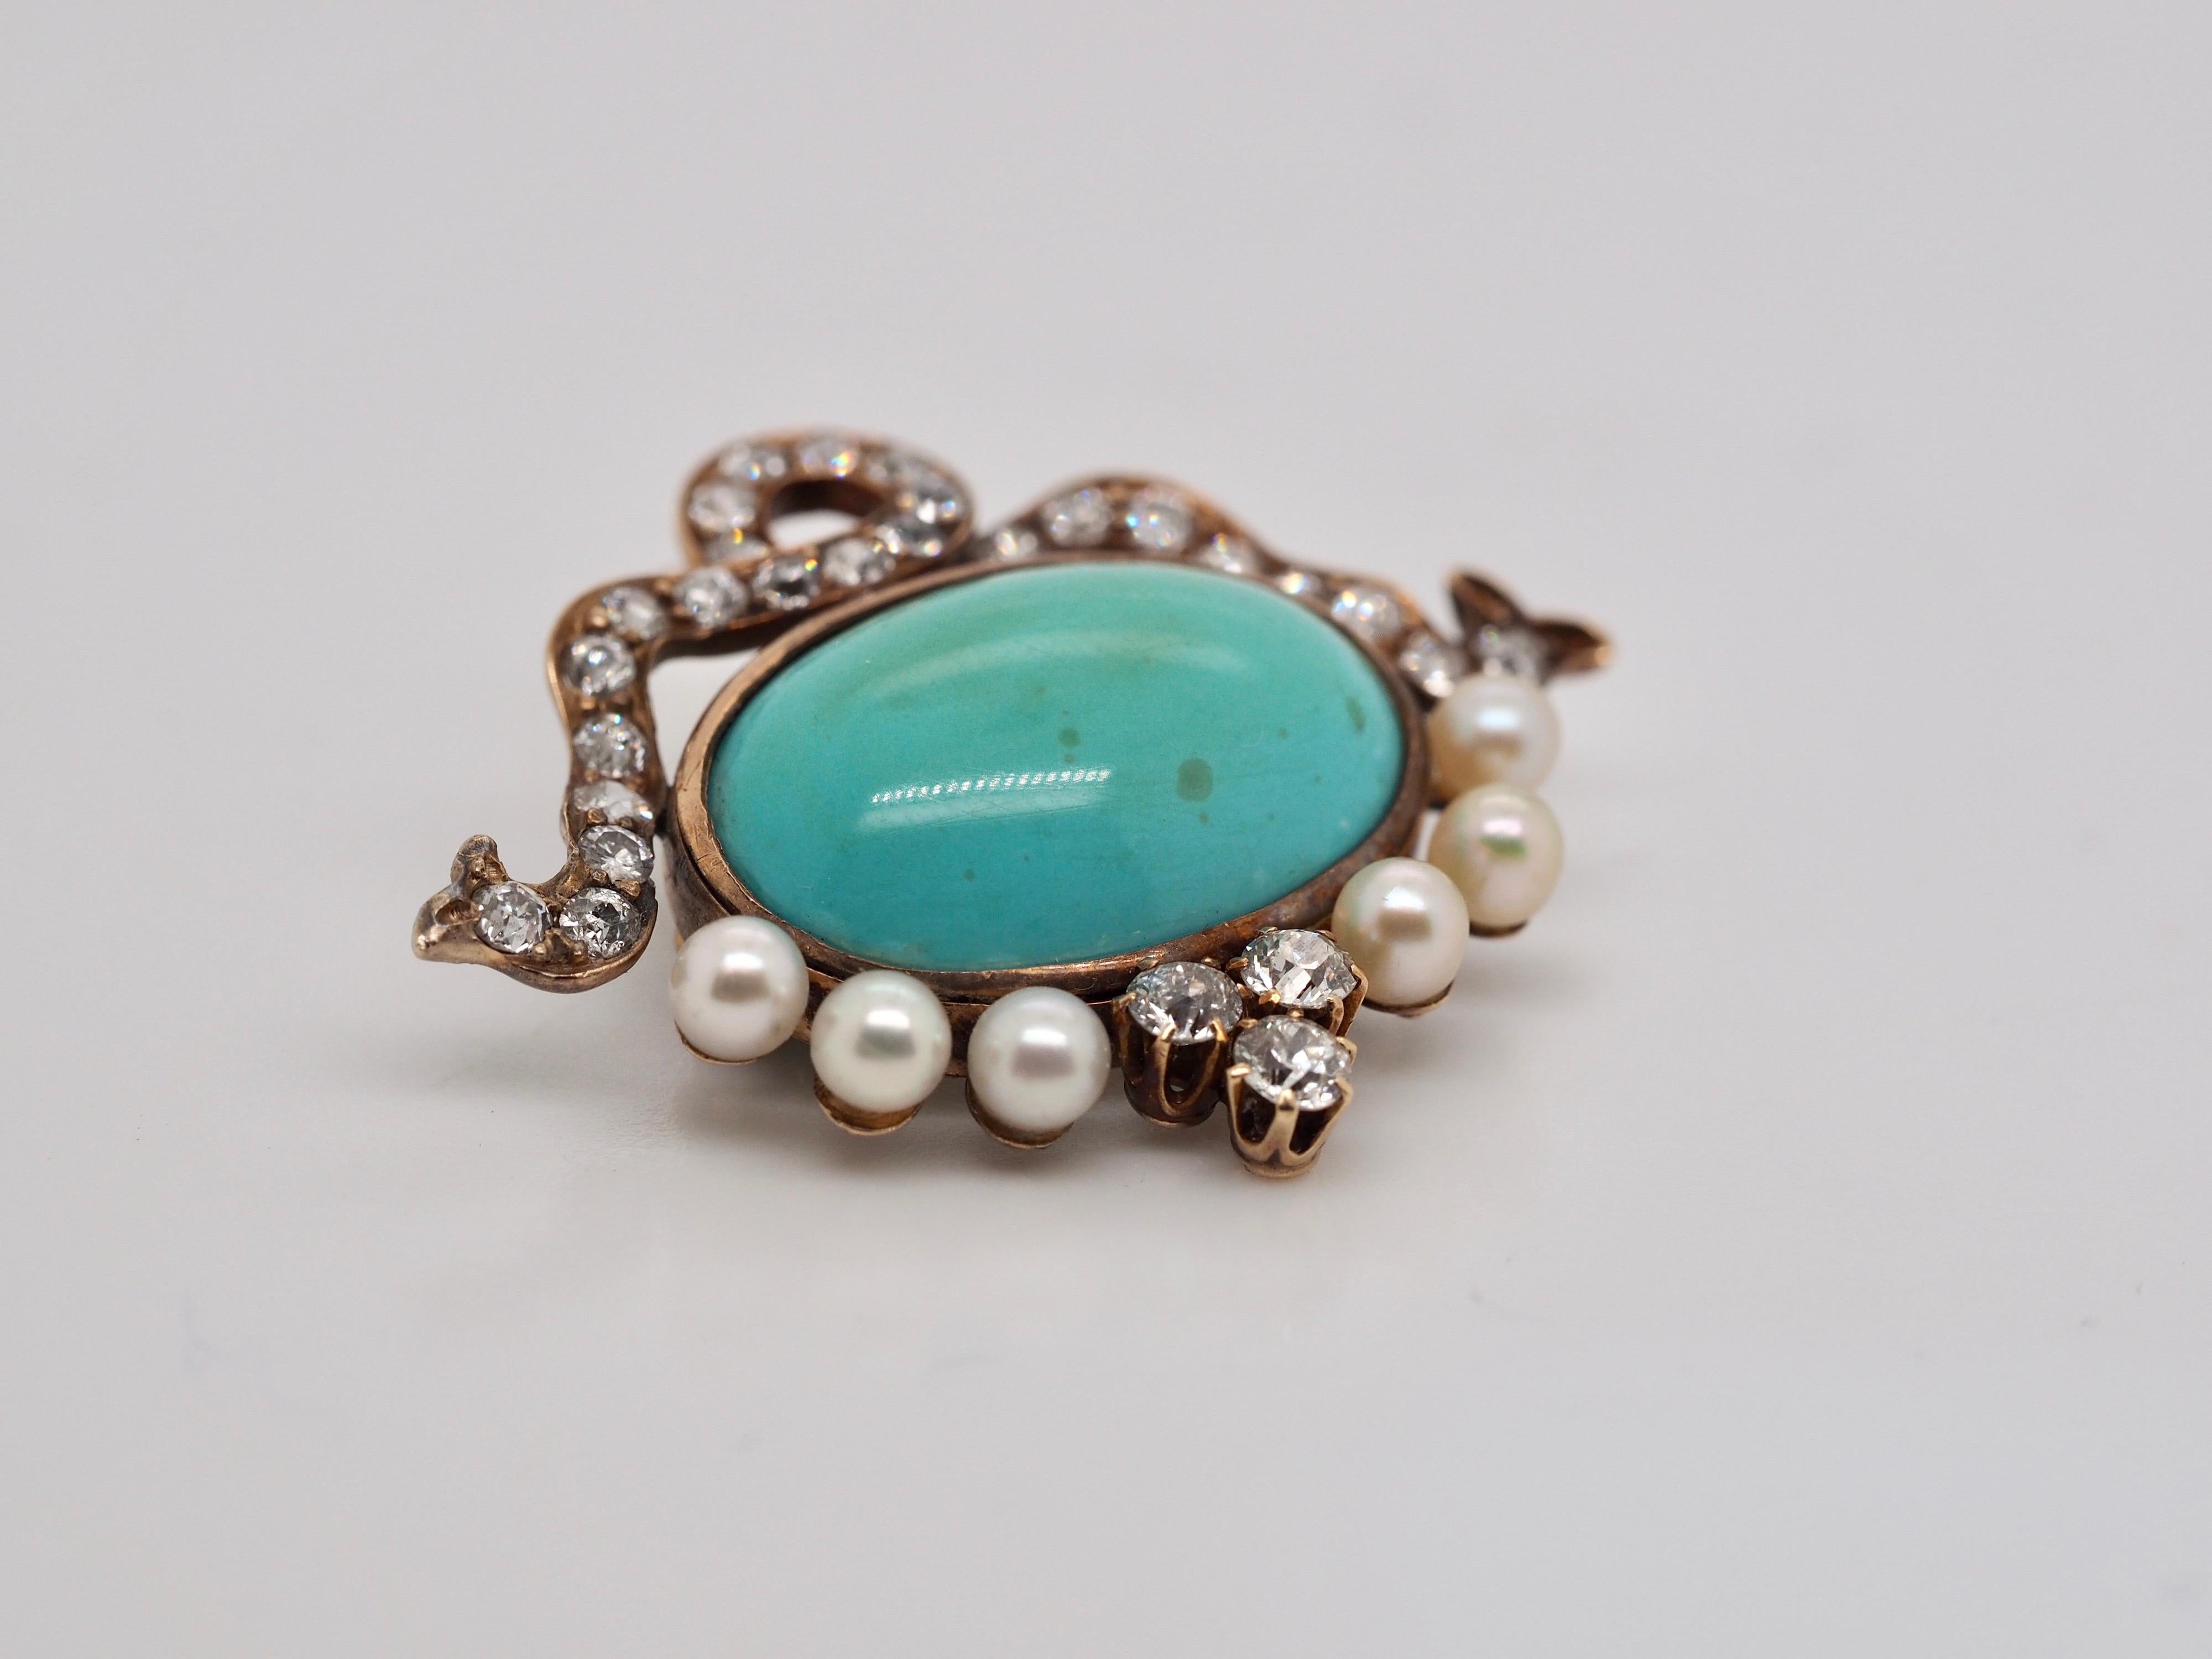 Art Deco Vintage Turquoise Diamond and Pearl Brooch/Pendant in 14 Karat Yellow Gold